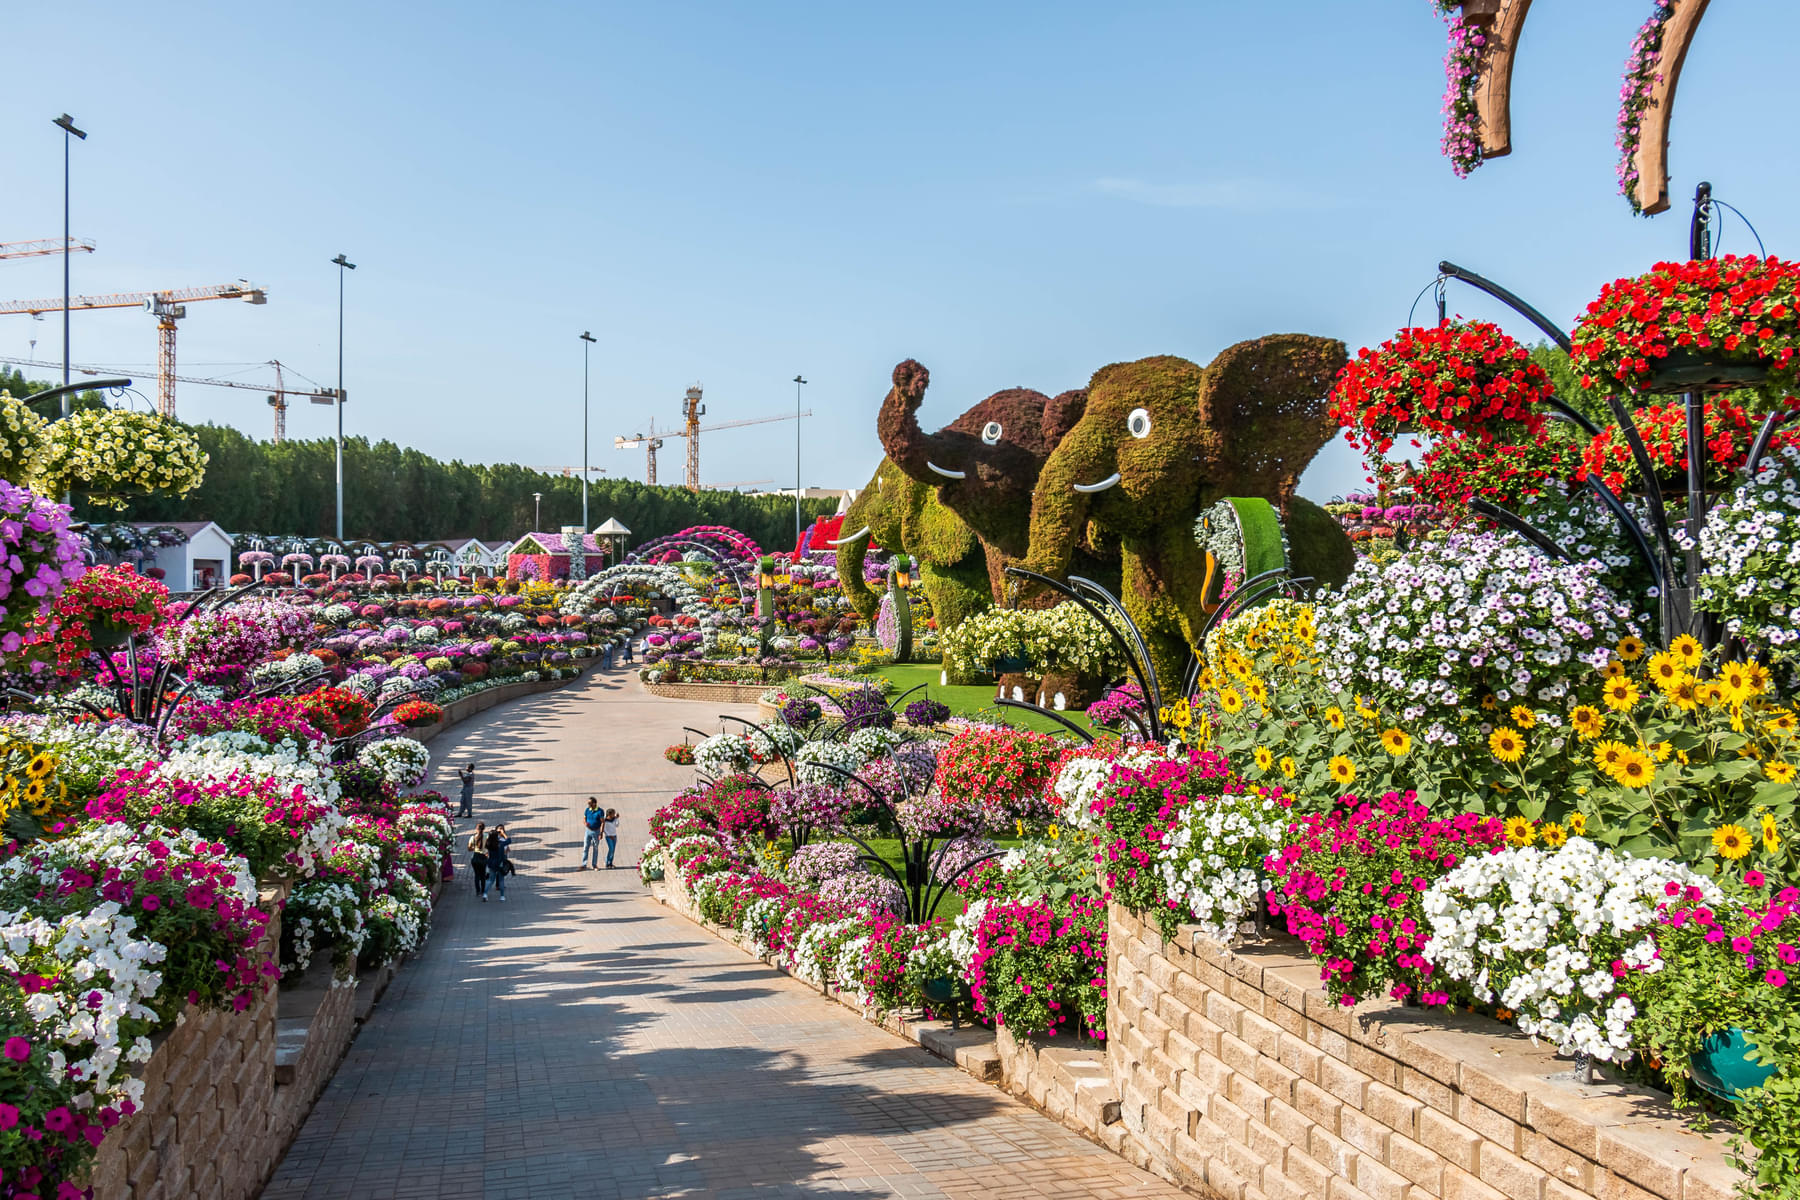 The Miracle Garden surely seems like a pathway to heaven